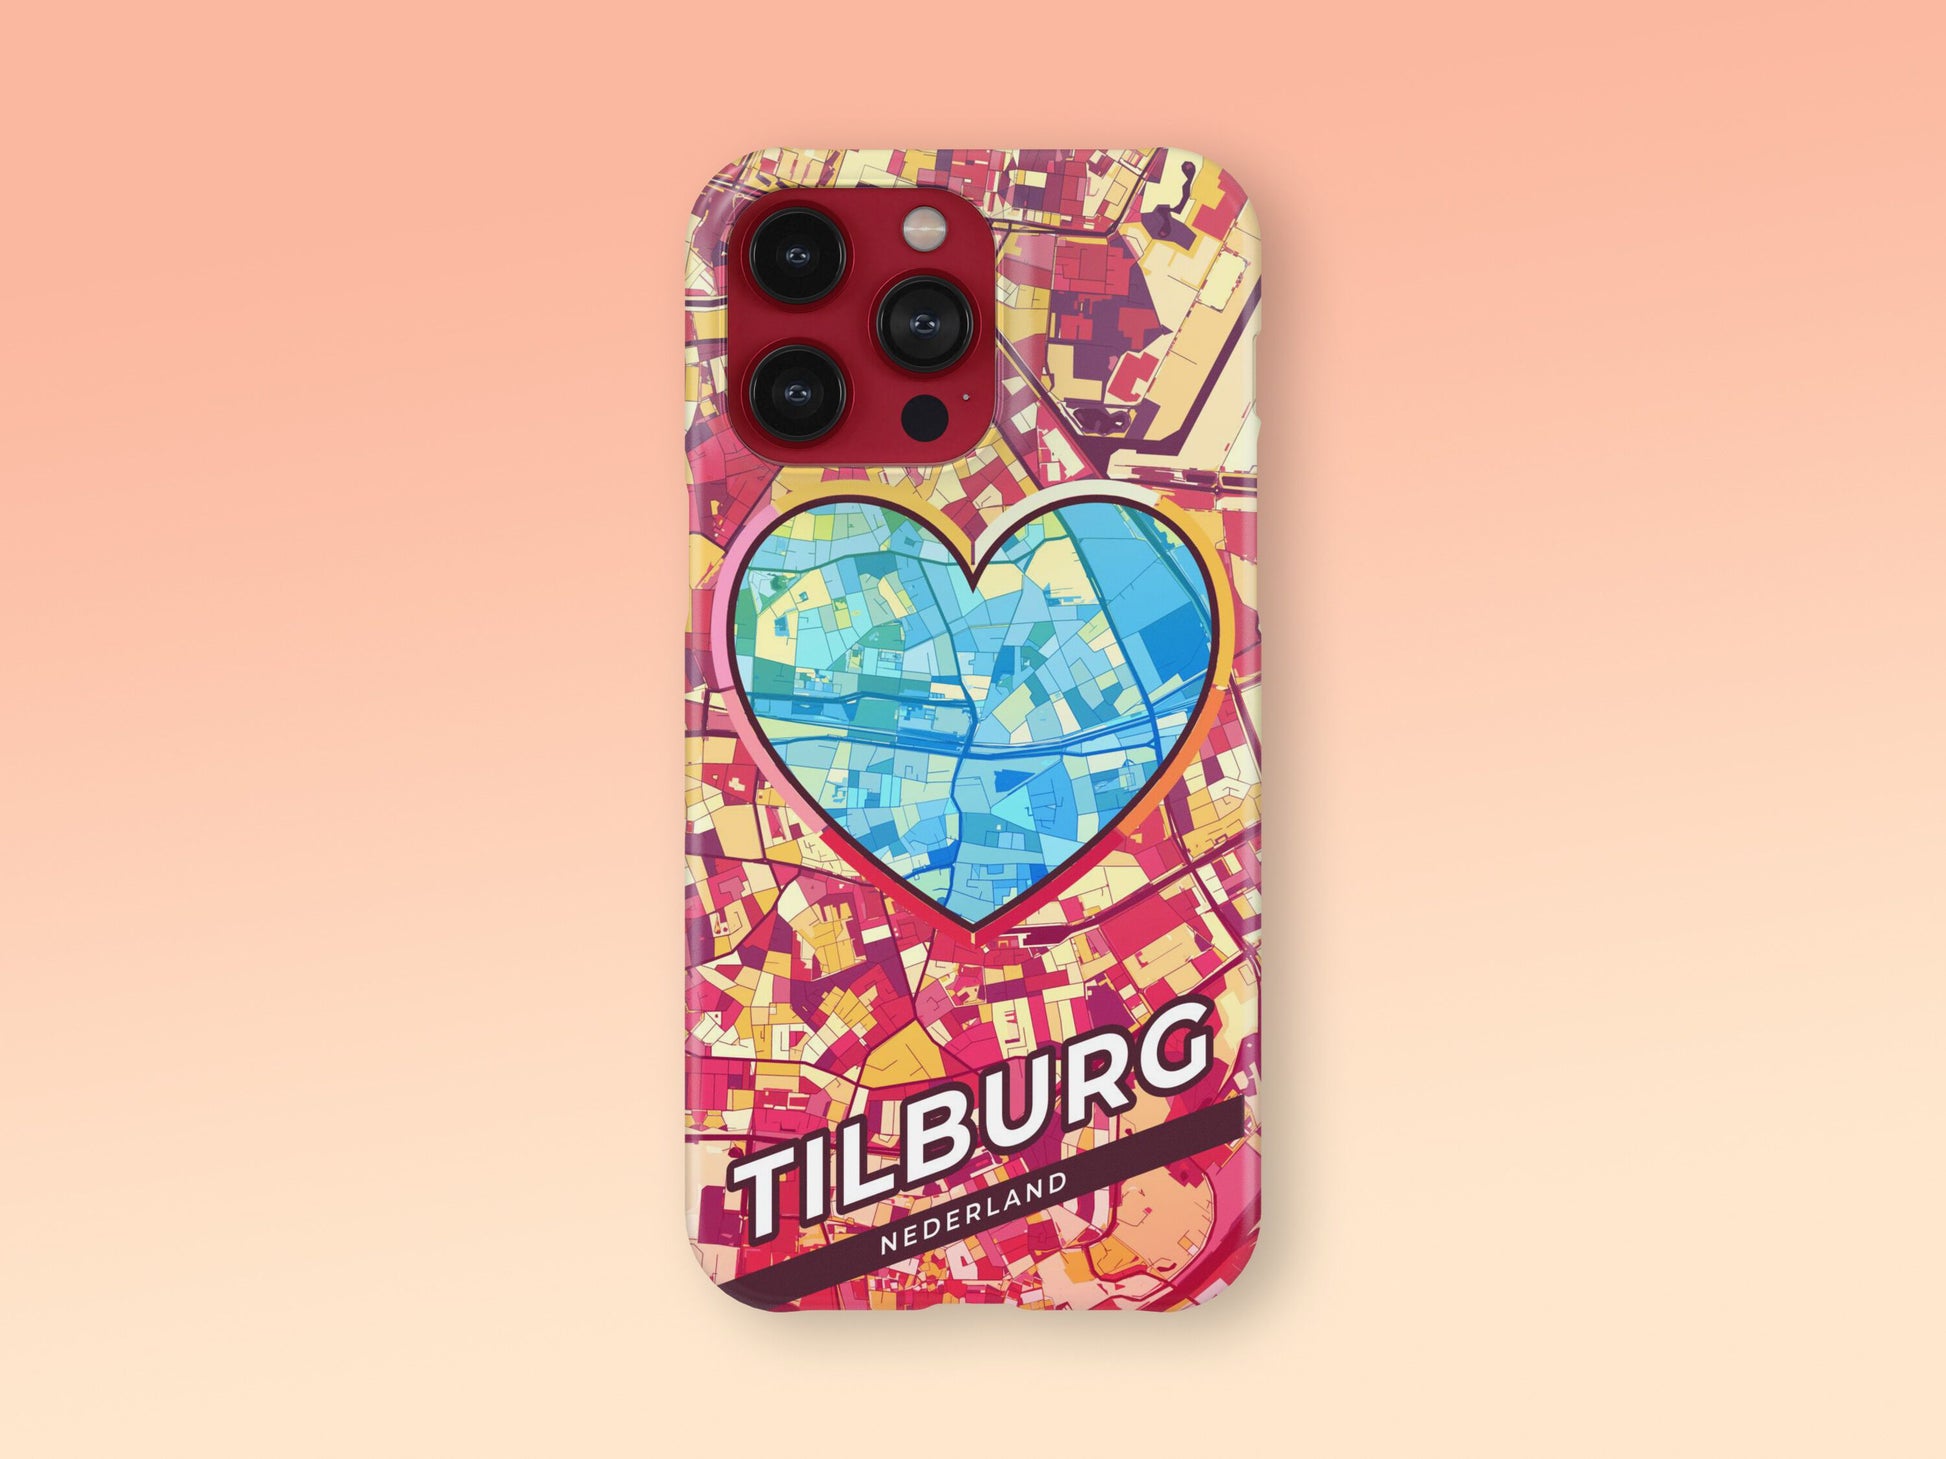 Tilburg Netherlands slim phone case with colorful icon. Birthday, wedding or housewarming gift. Couple match cases. 2